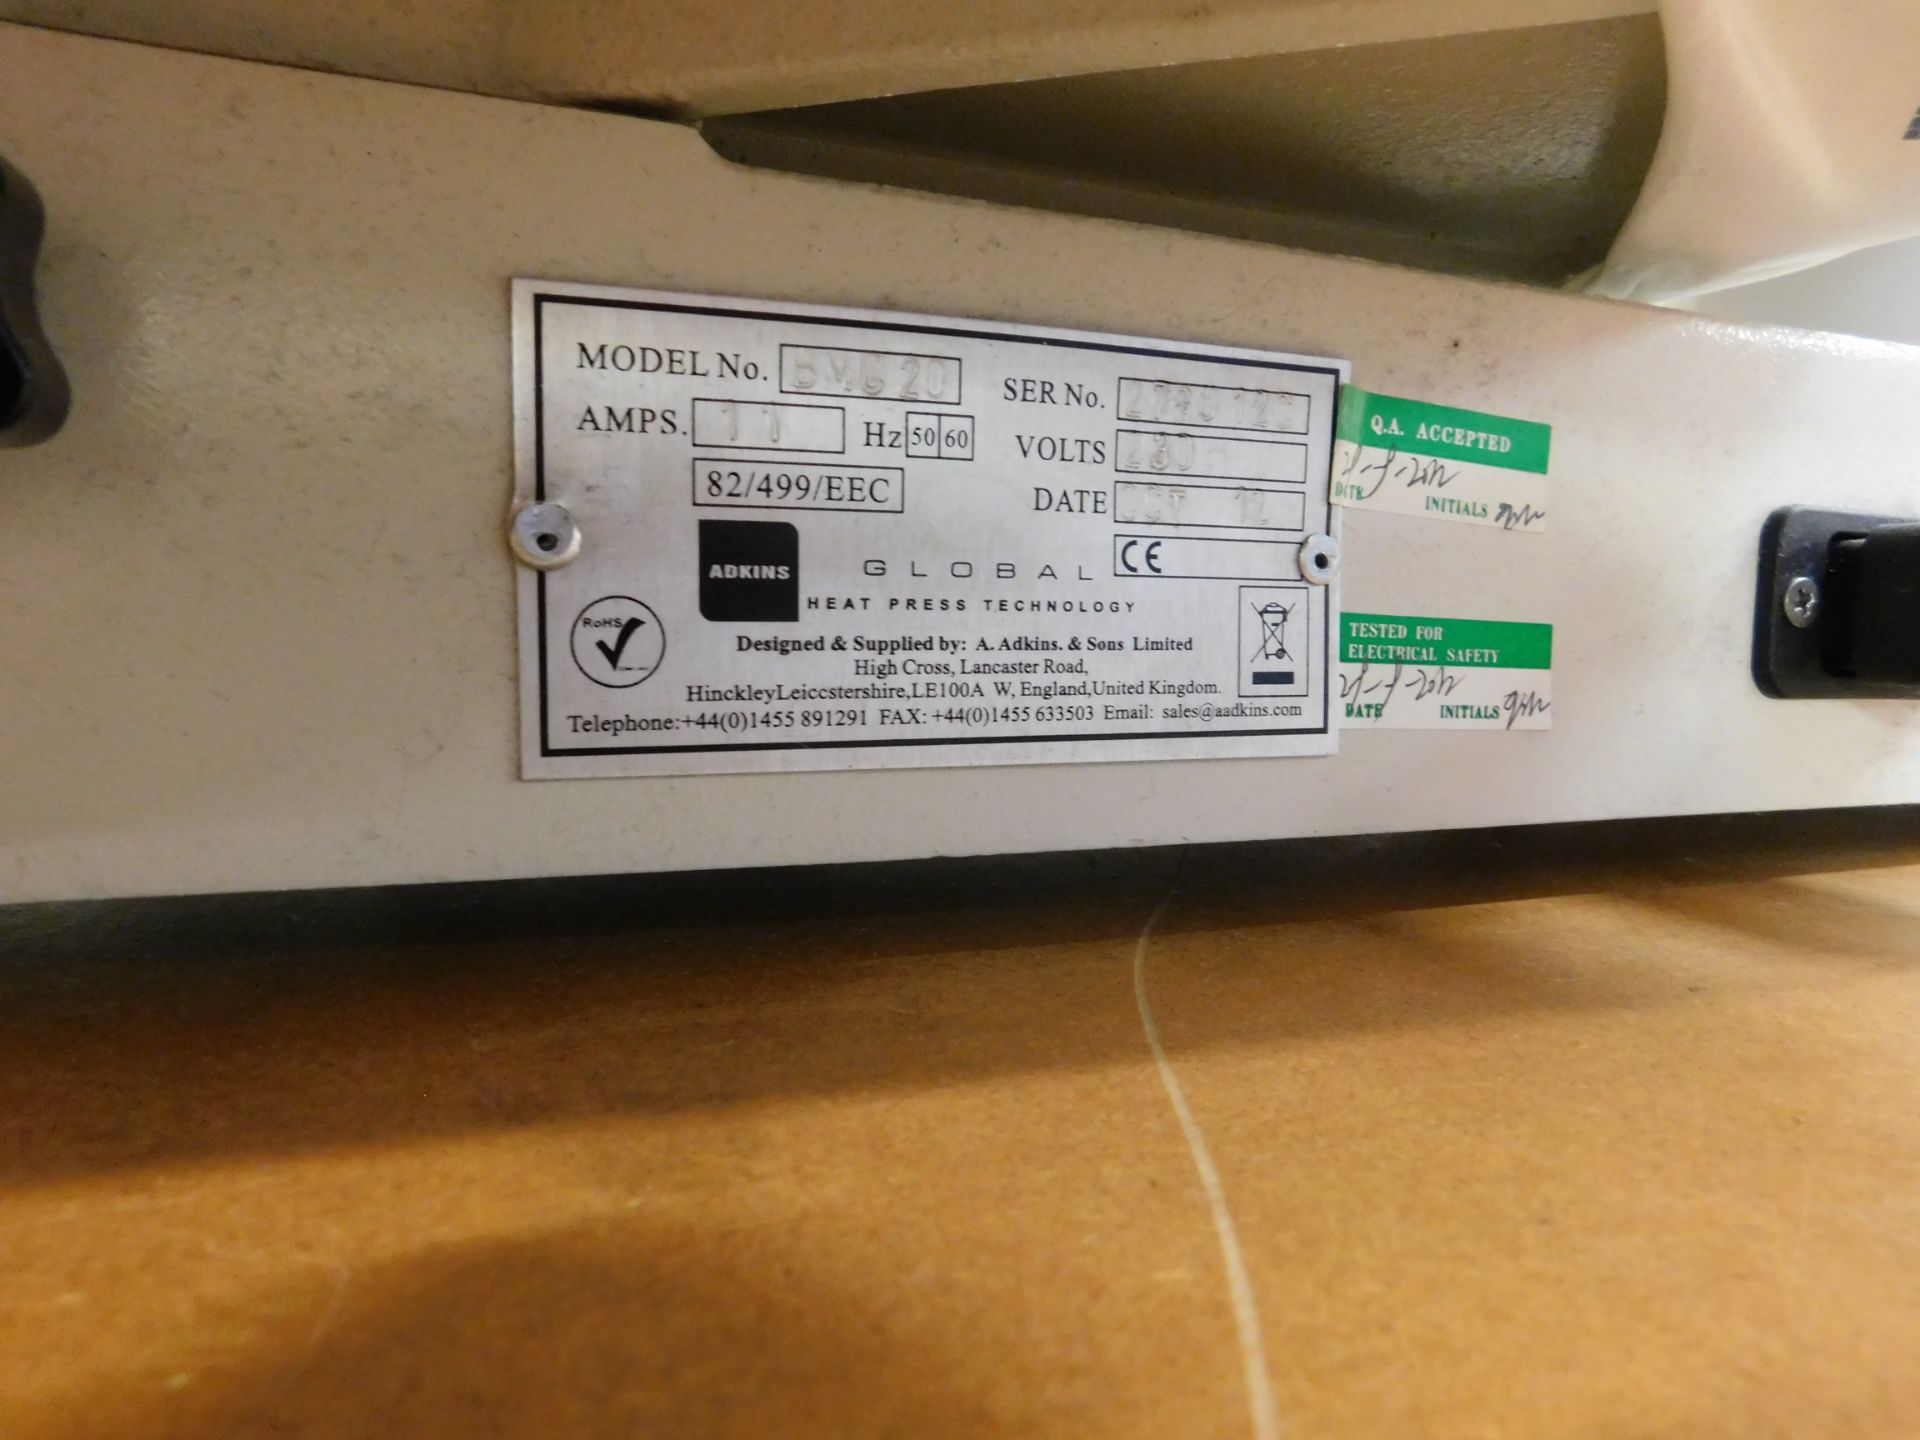 Adkins Magic Touch BMC20 heat press, Serial Number 278012C, Year 2012 - Image 2 of 3